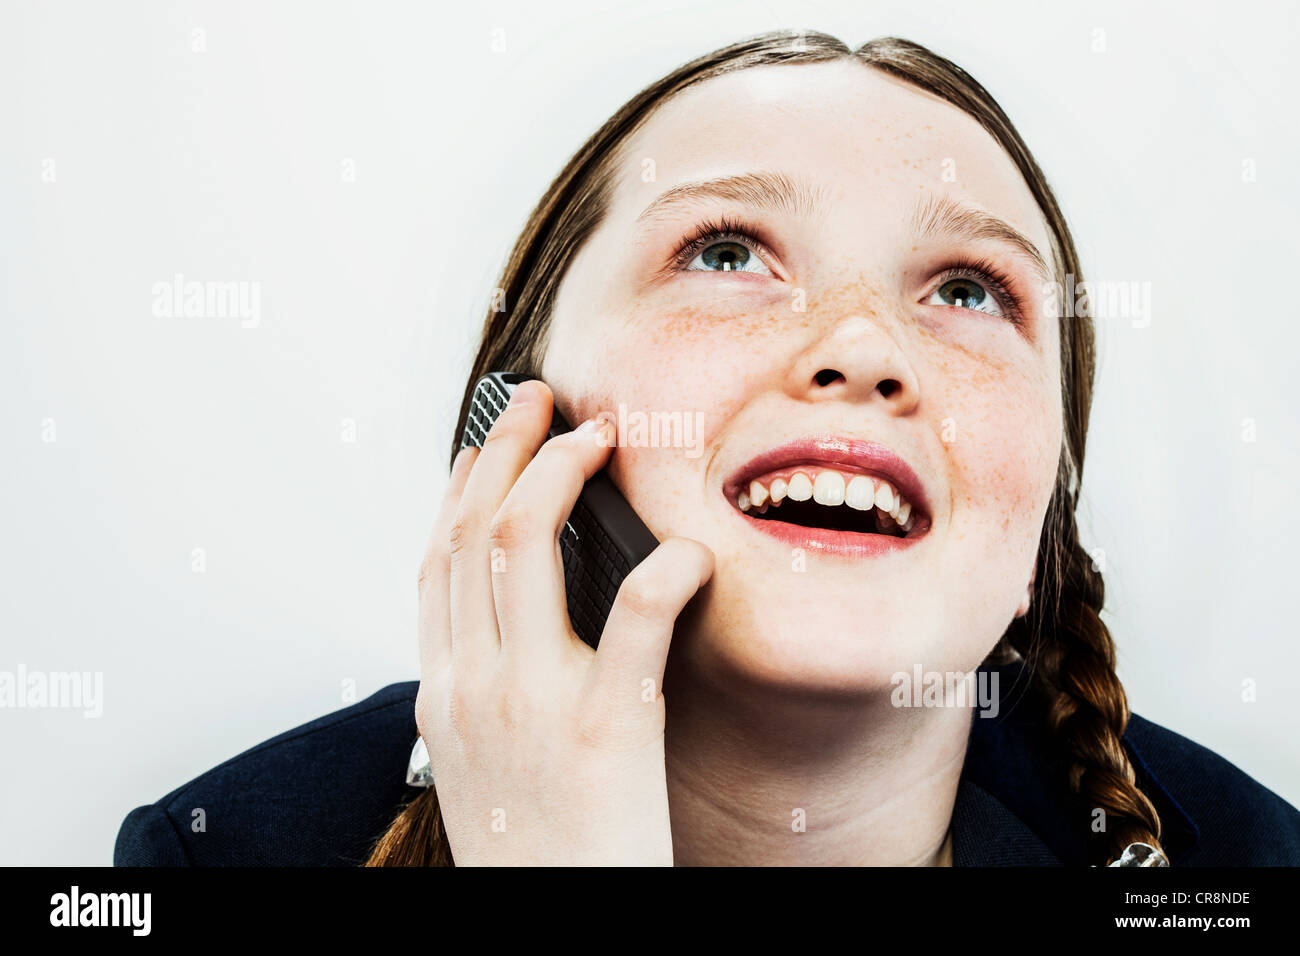 Girl on cell phone, looking up Stock Photo